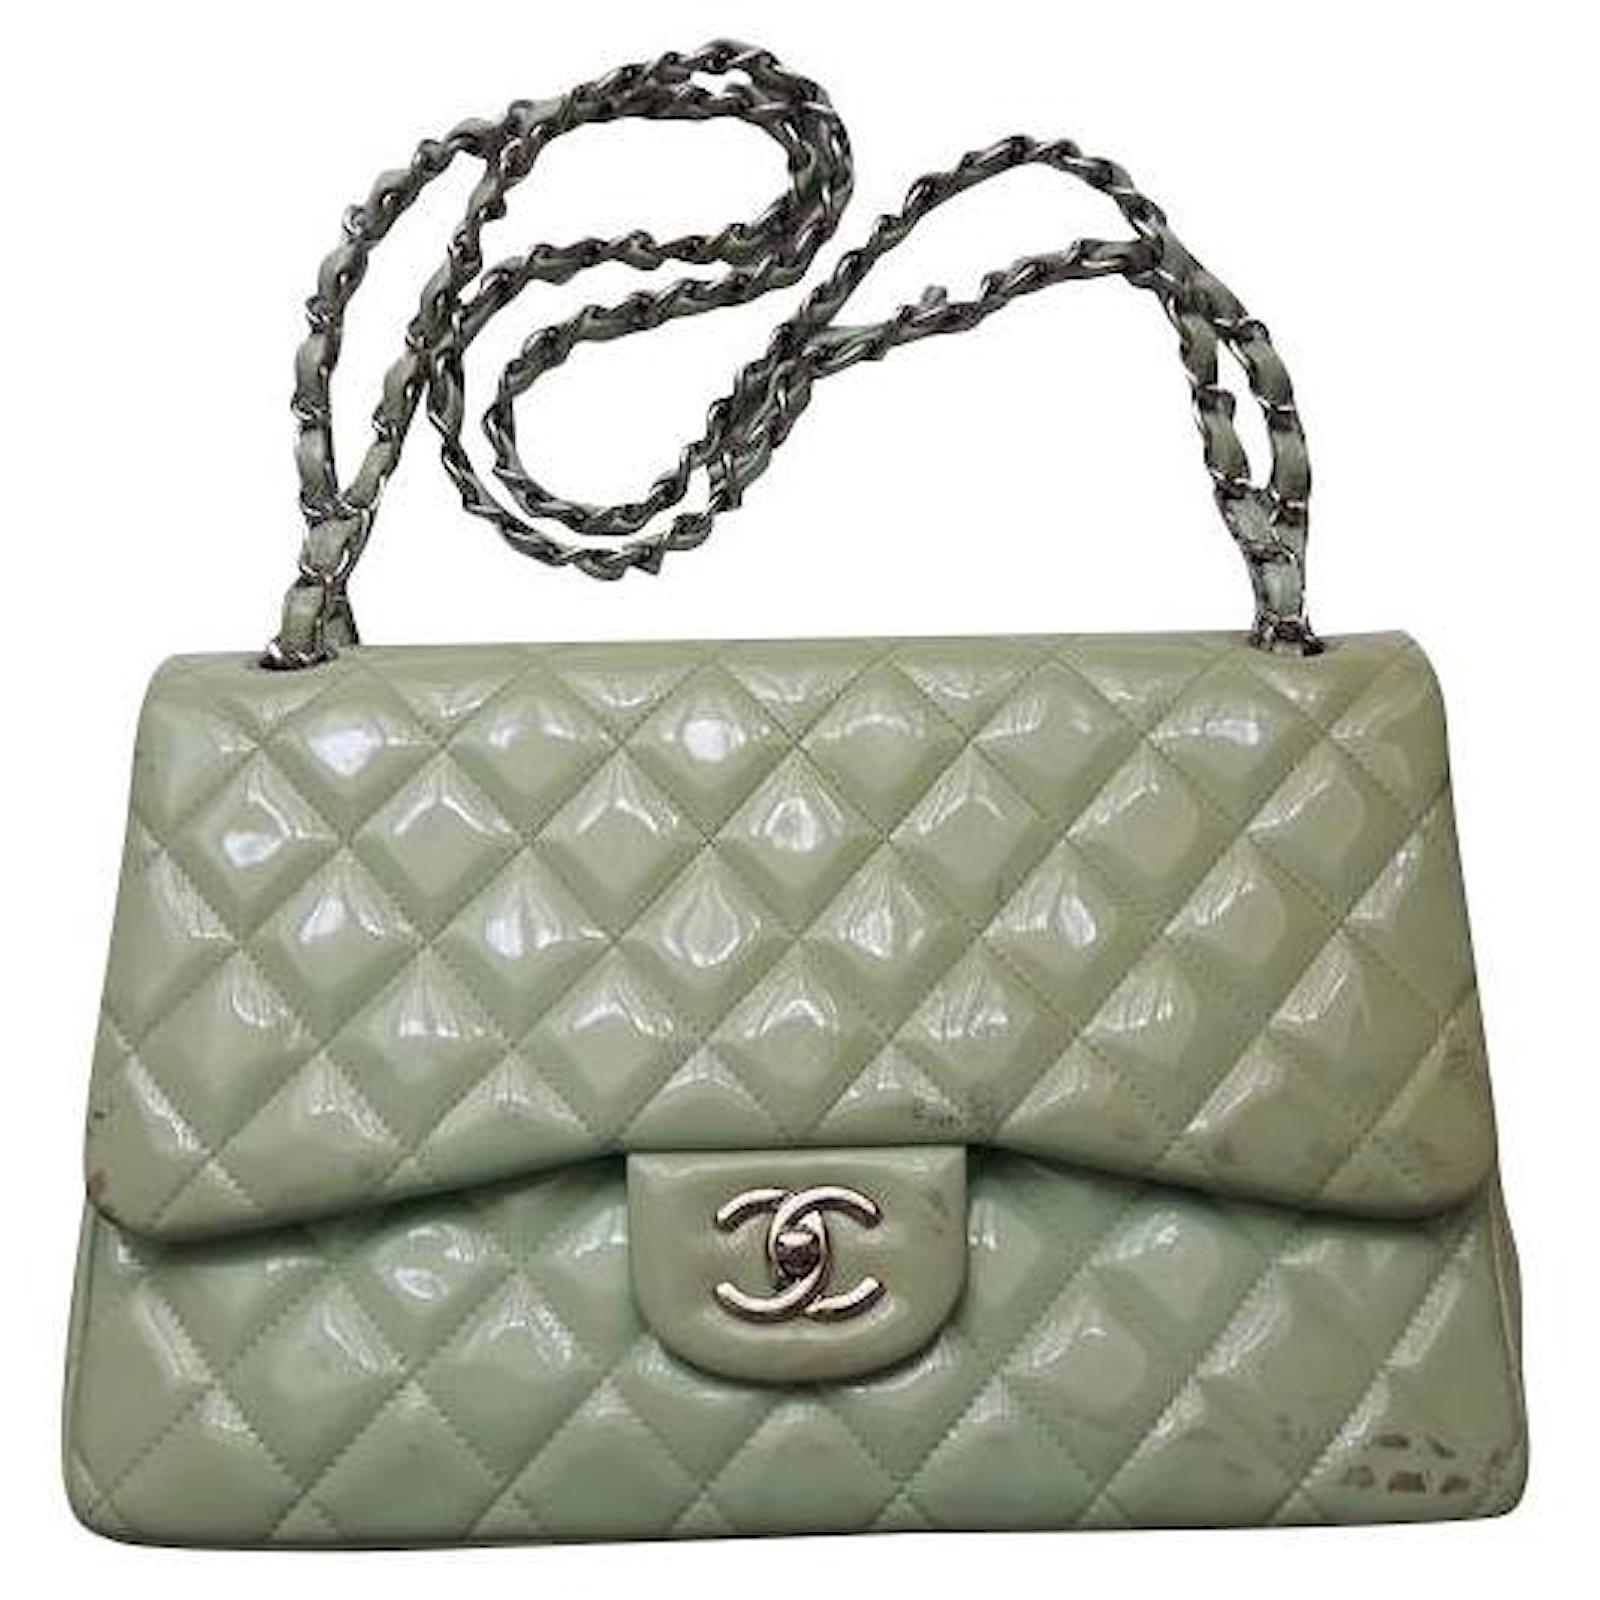 Chanel Maxi Single Flap, Patent leather, Green SHW - Laulay Luxury